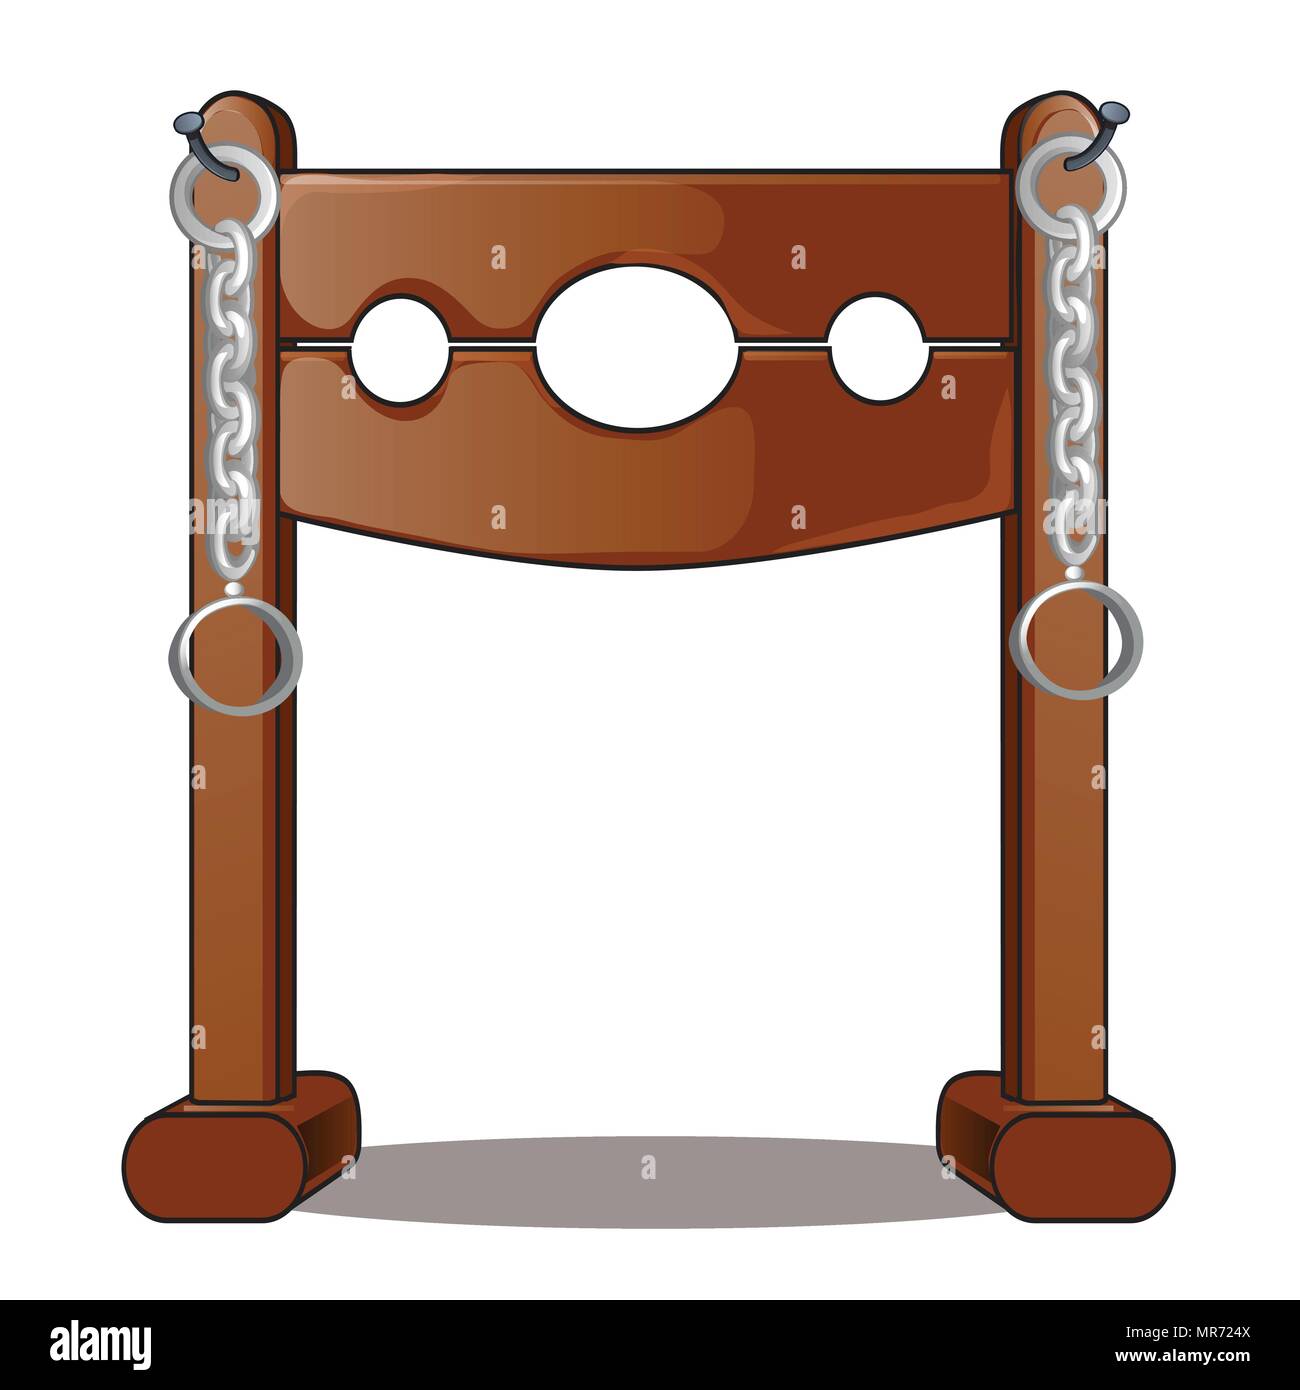 Ancient instruments of torture. Wooden shackles isolated on white background. Vector illustration. Stock Vector